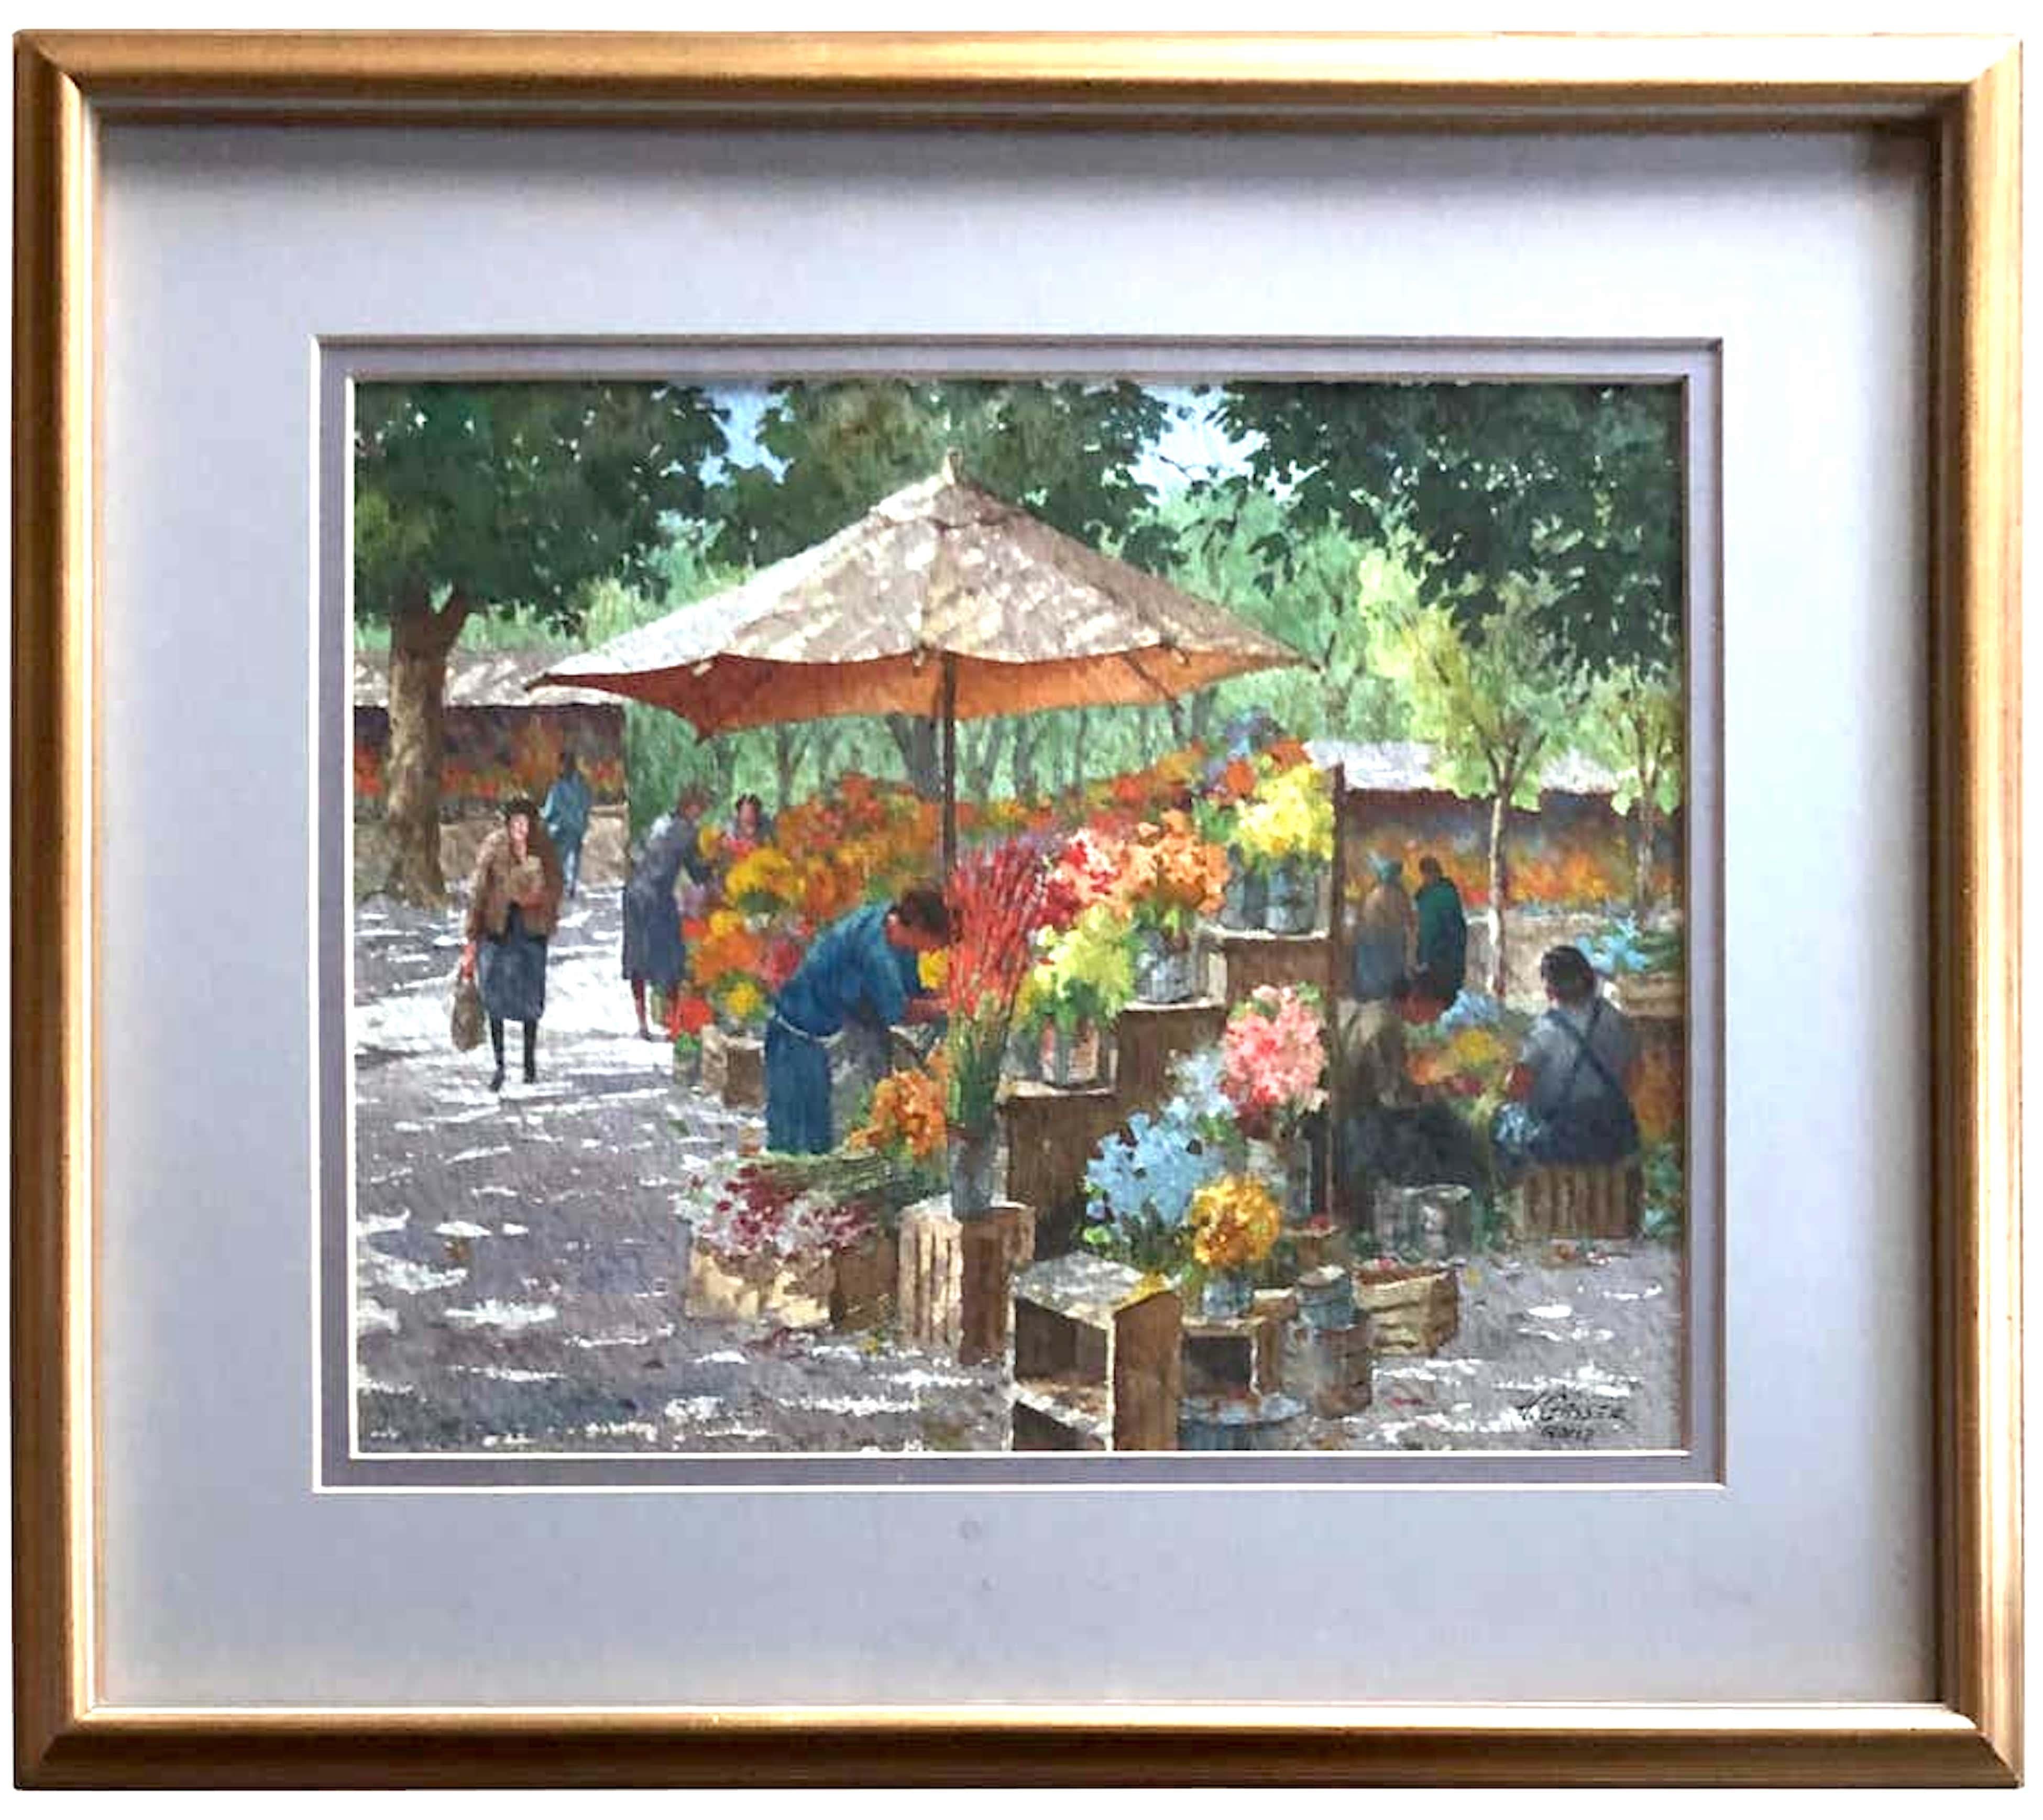 The Flower Workers, Rome - Art by Henry Martin Gasser